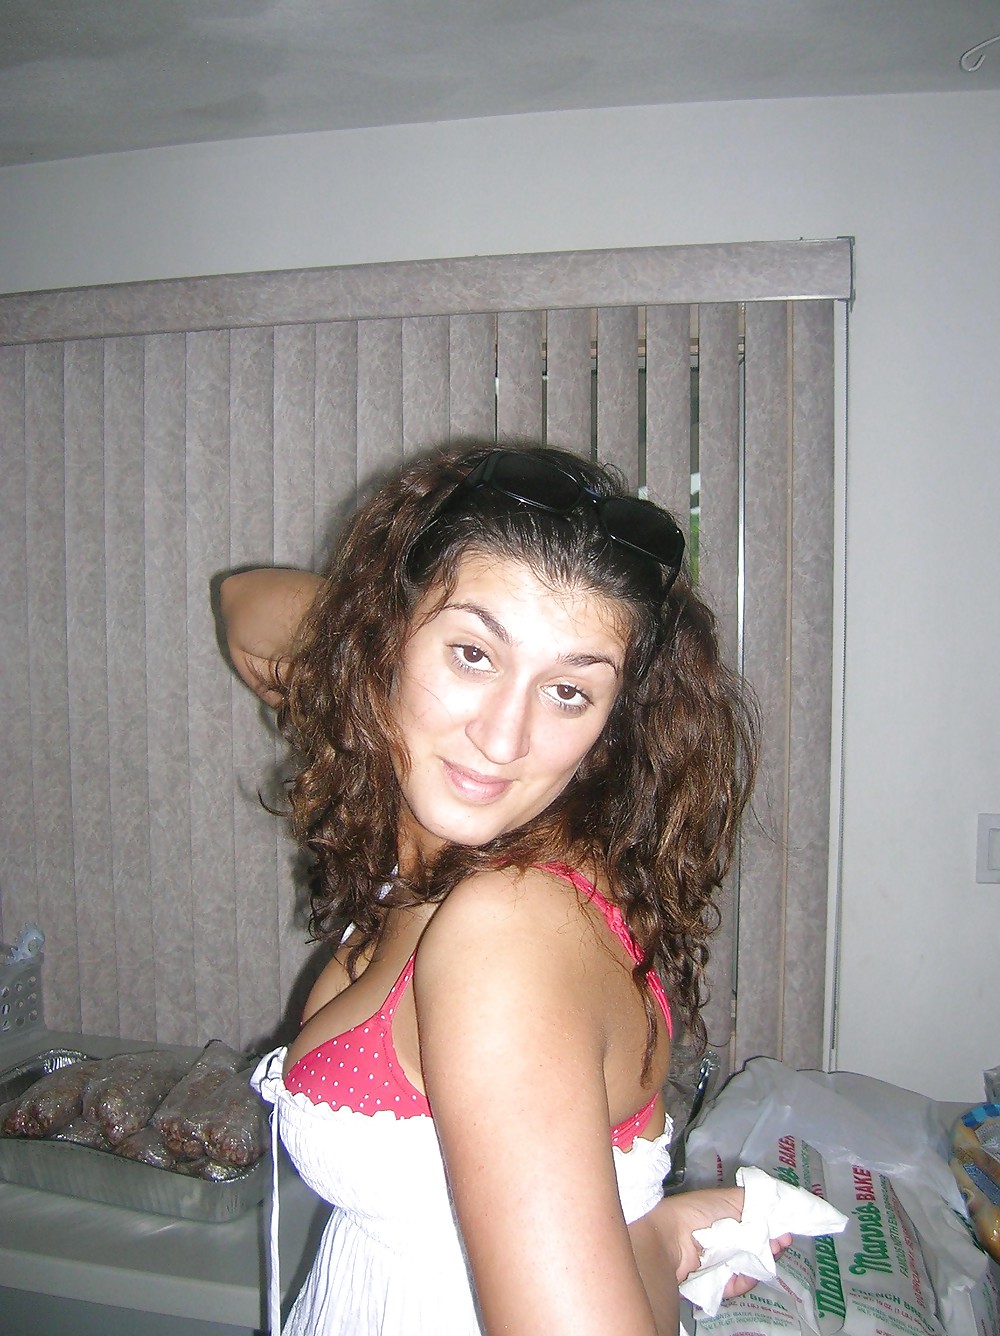 Busty College Looking Babe adult photos